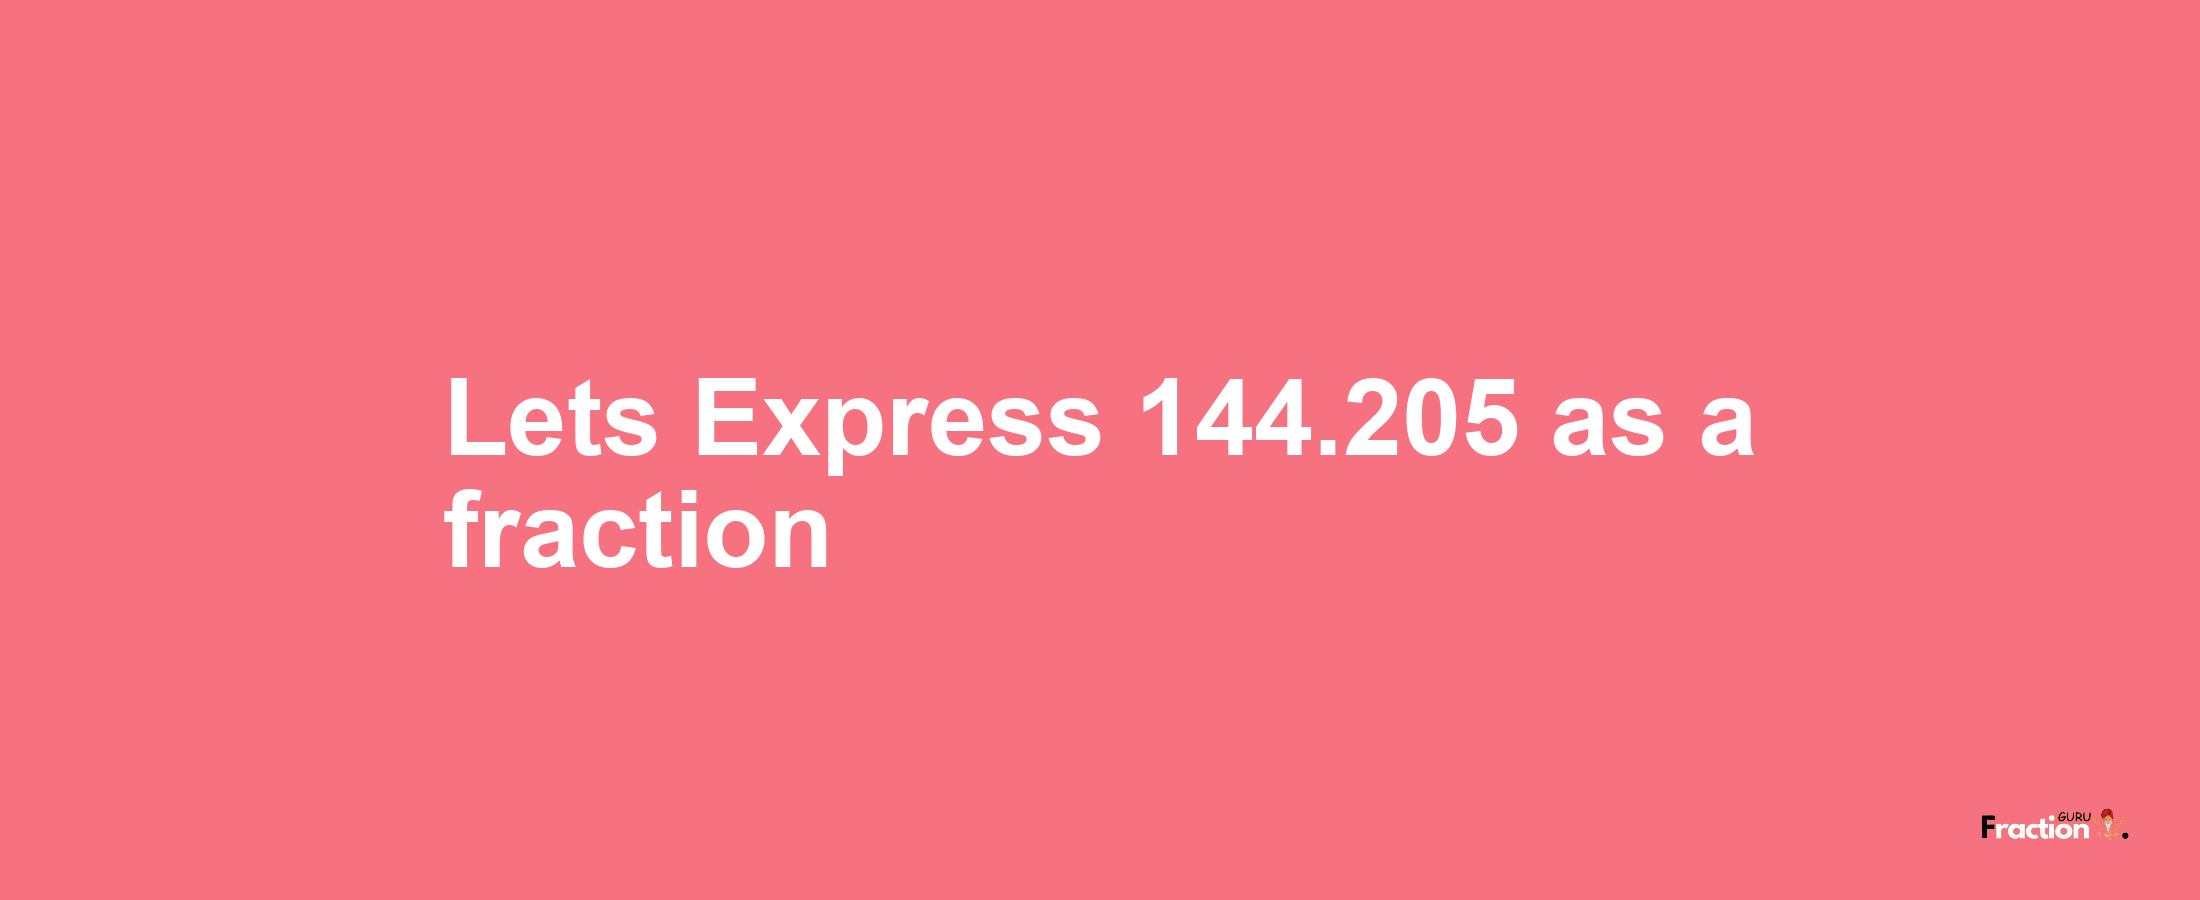 Lets Express 144.205 as afraction